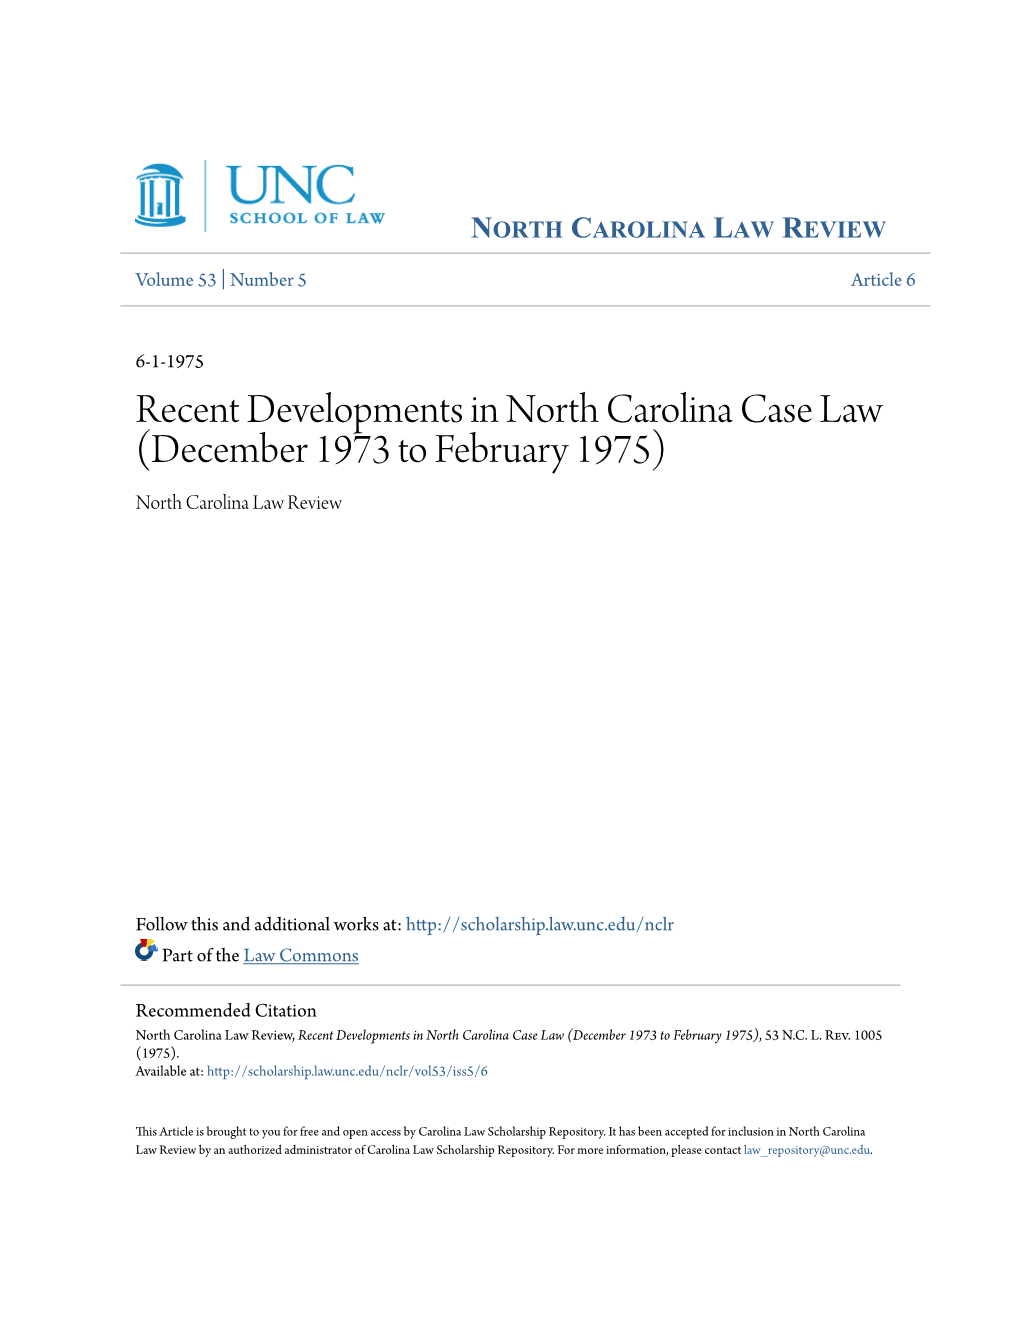 Recent Developments in North Carolina Case Law (December 1973 to February 1975) North Carolina Law Review